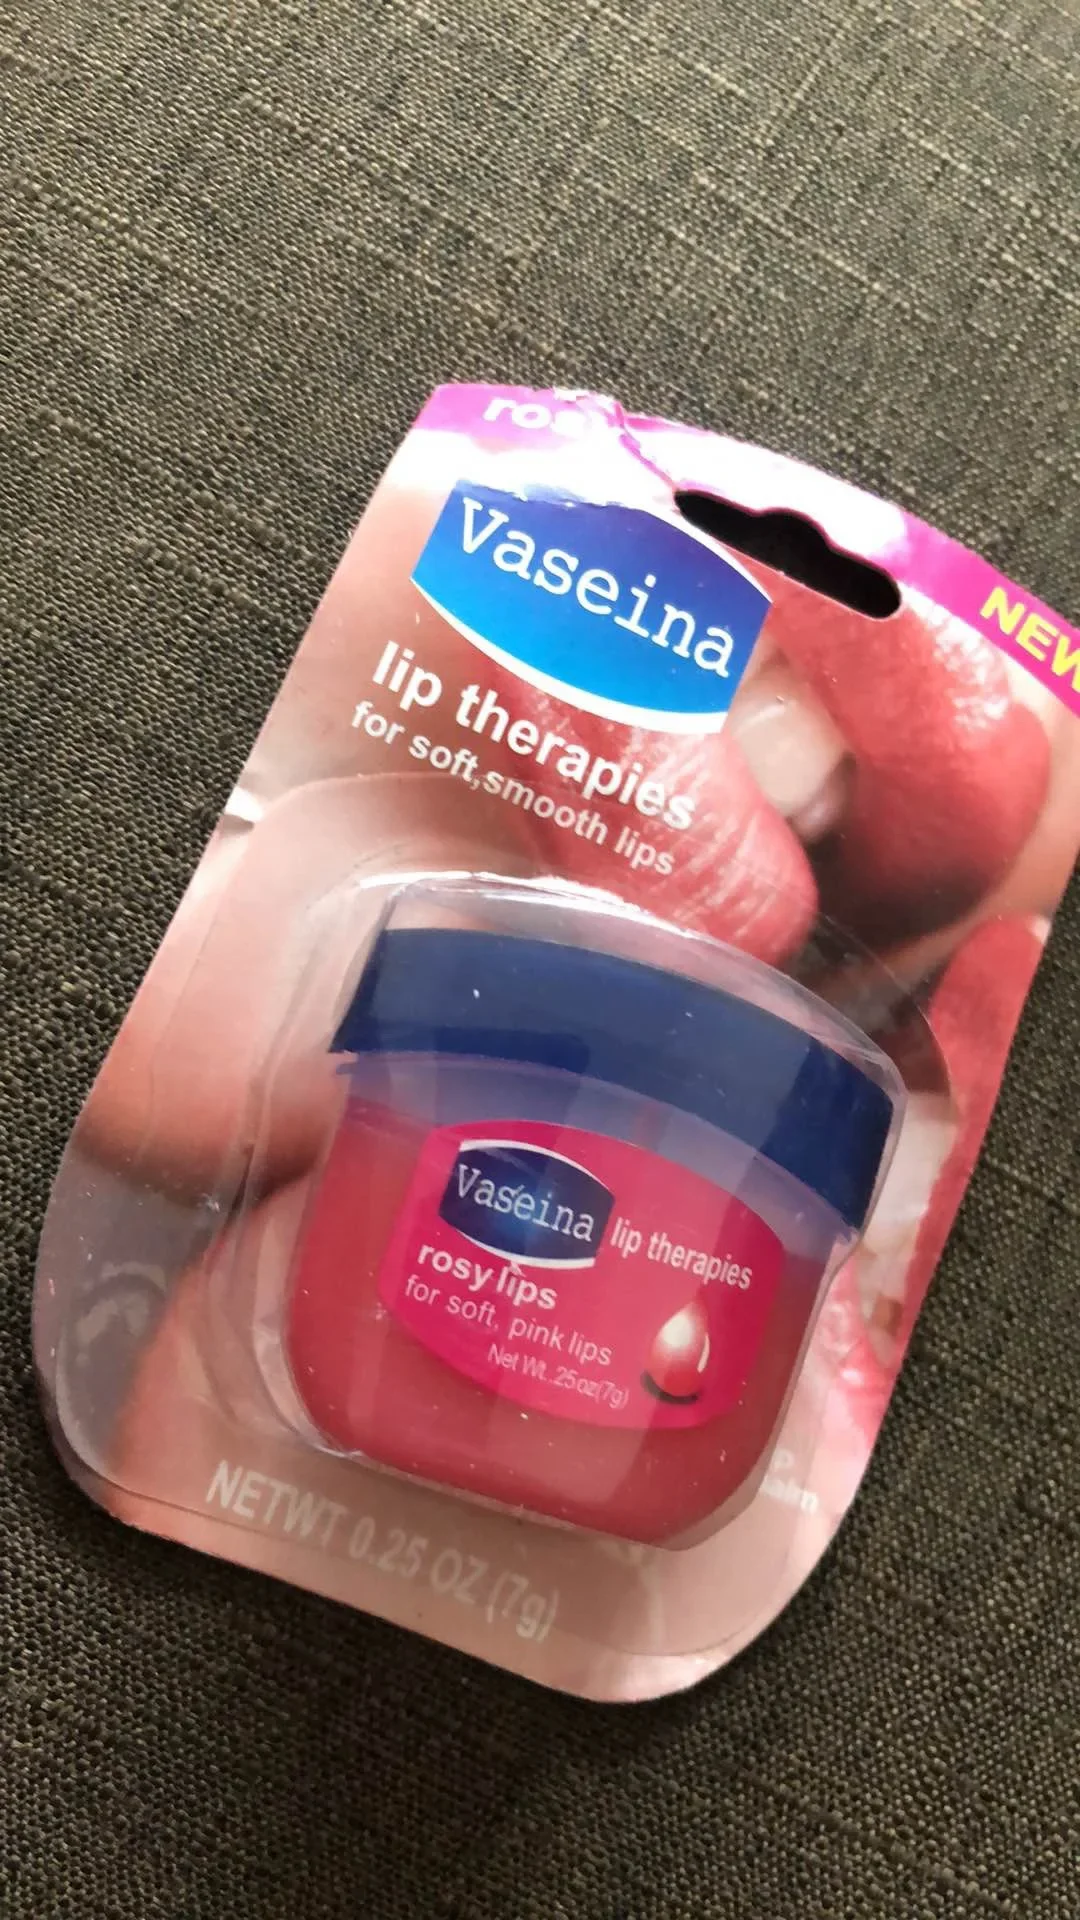 Lip Therapy 7g 【NC】Vaselin Lip Therapy Rosy Lips Balm 7g